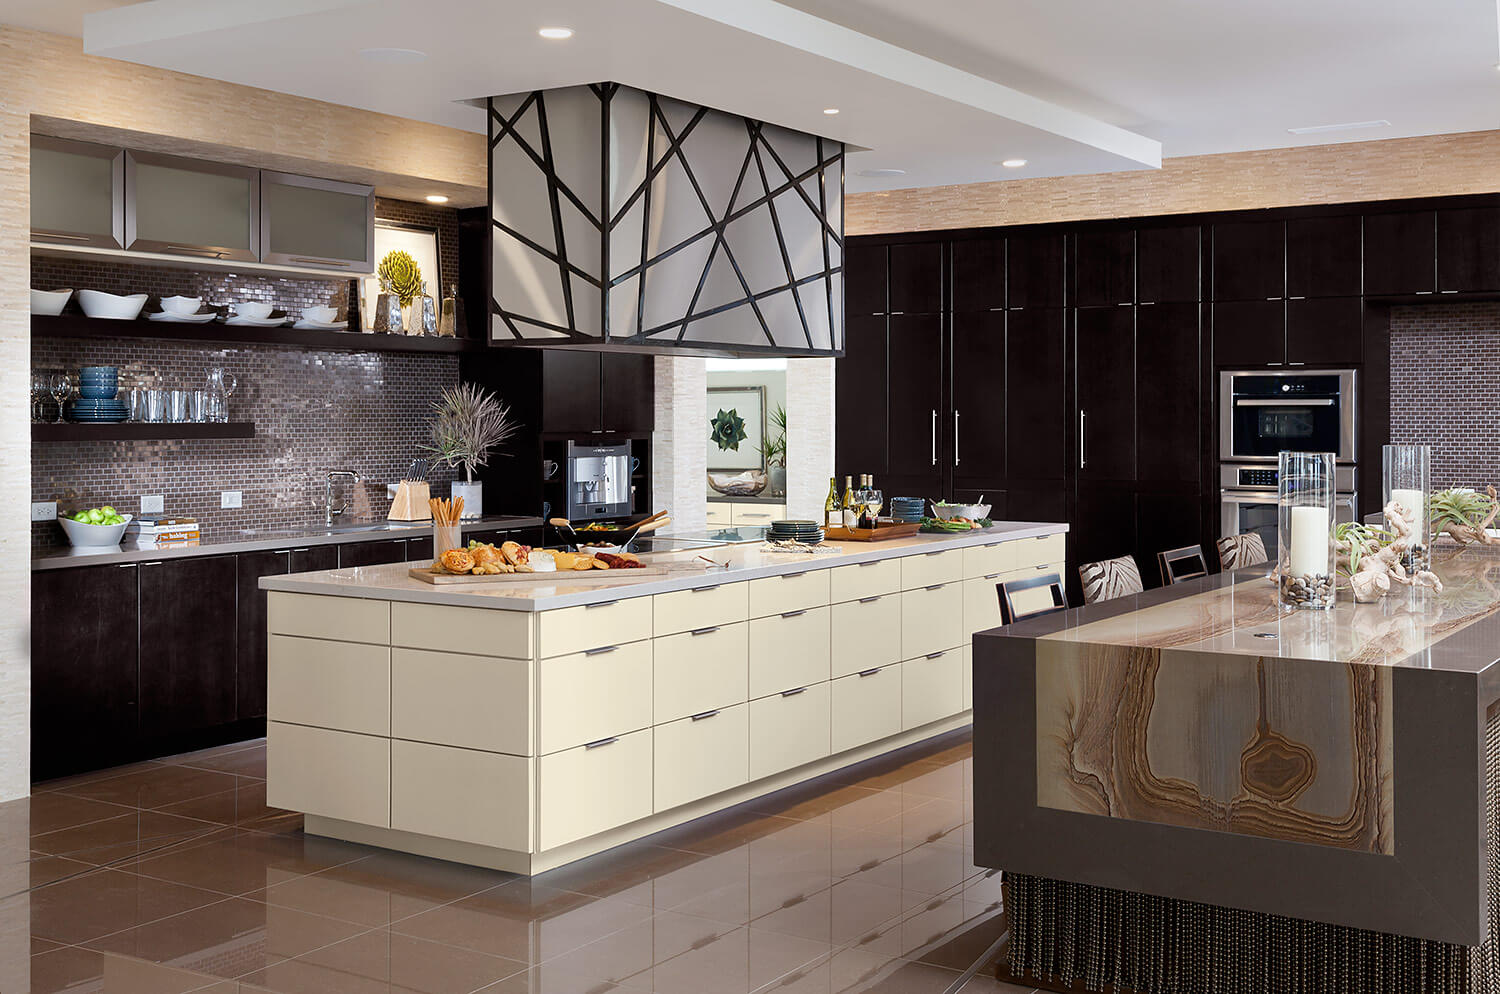 Timberlake Cabinetry design and service spotlighted in 2014 New